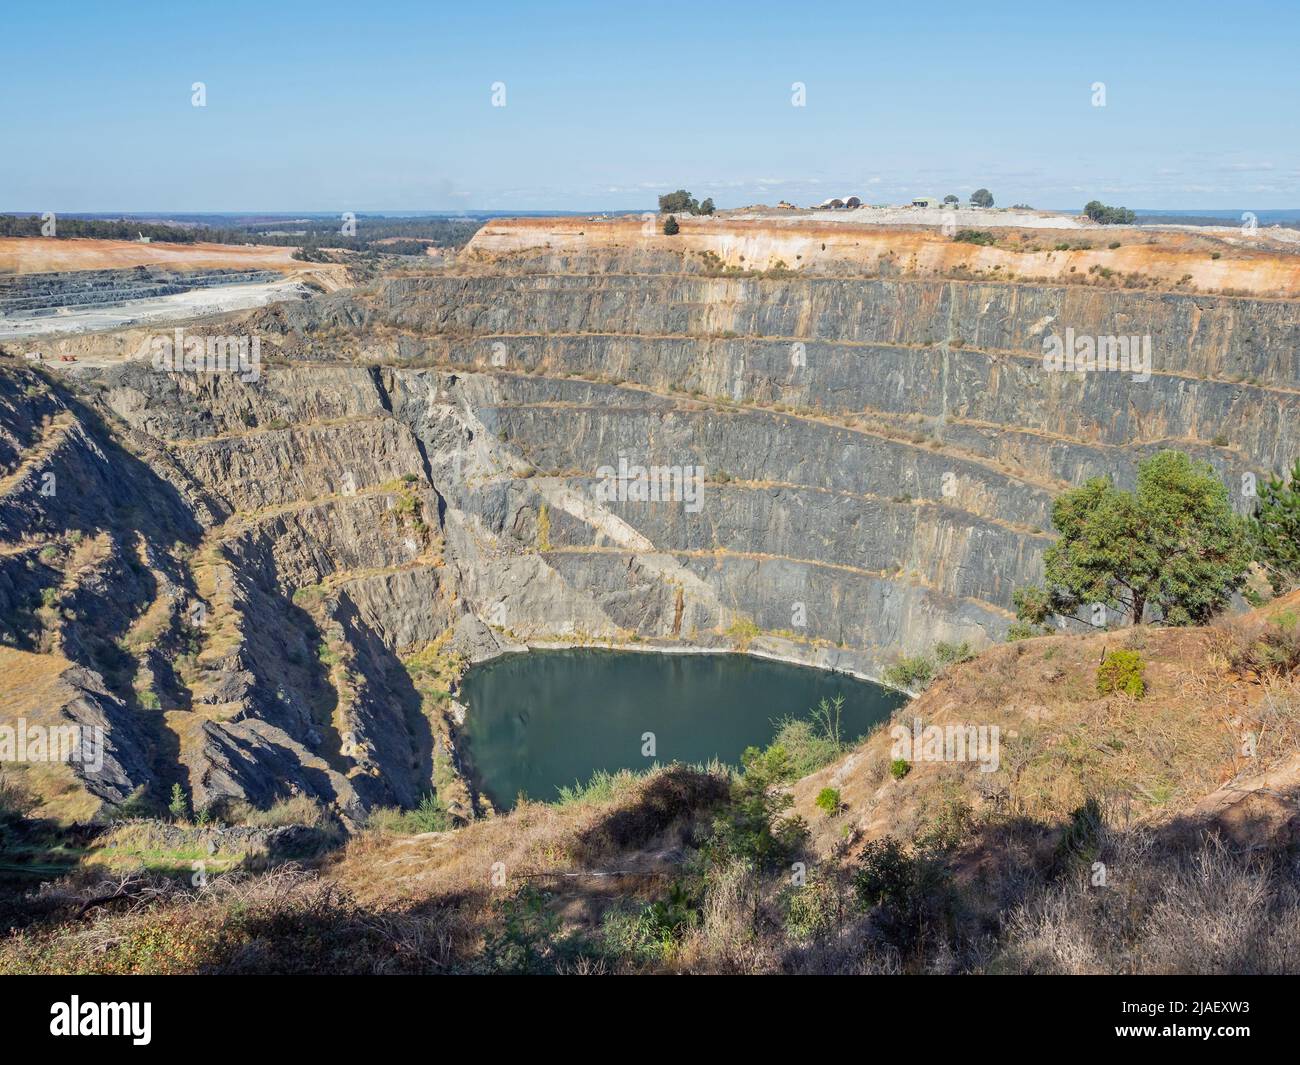 The Greenbushes lithium mine is an open-pit mining operation in Western Australia and is the world's largest hard-rock lithium mine. It is located to Stock Photo